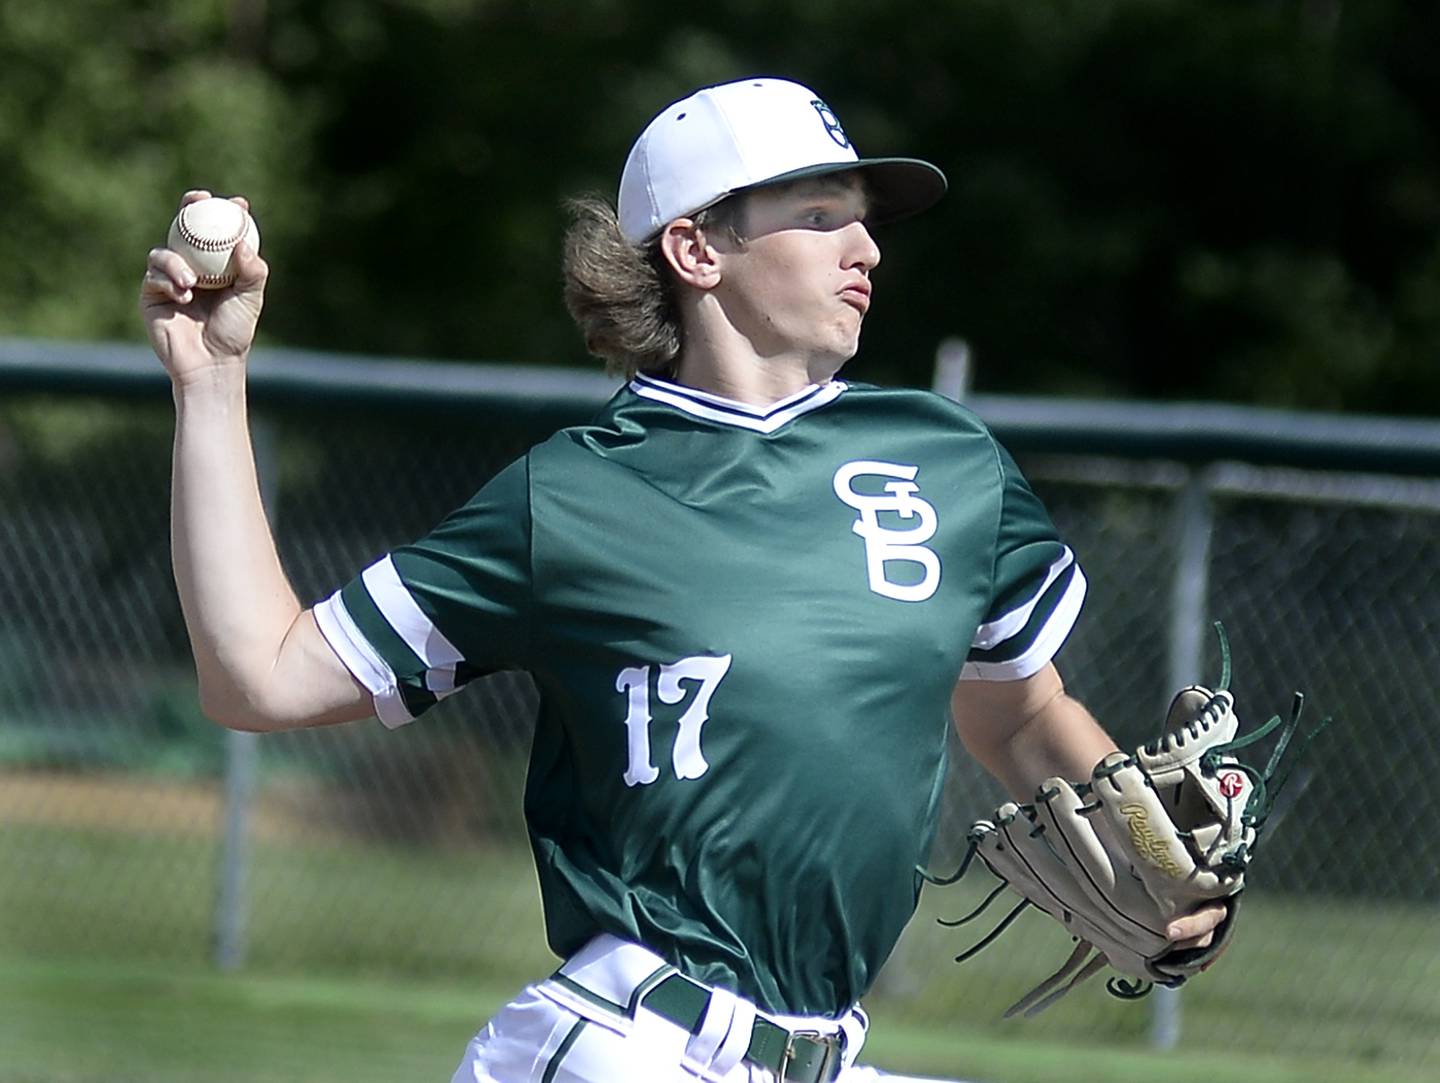 St. Bede starting pitcher Auggie Weisbrock (17) delivers home Monday, May 16, 2022, during the Bruins' regional-opening win at home over Earlville.